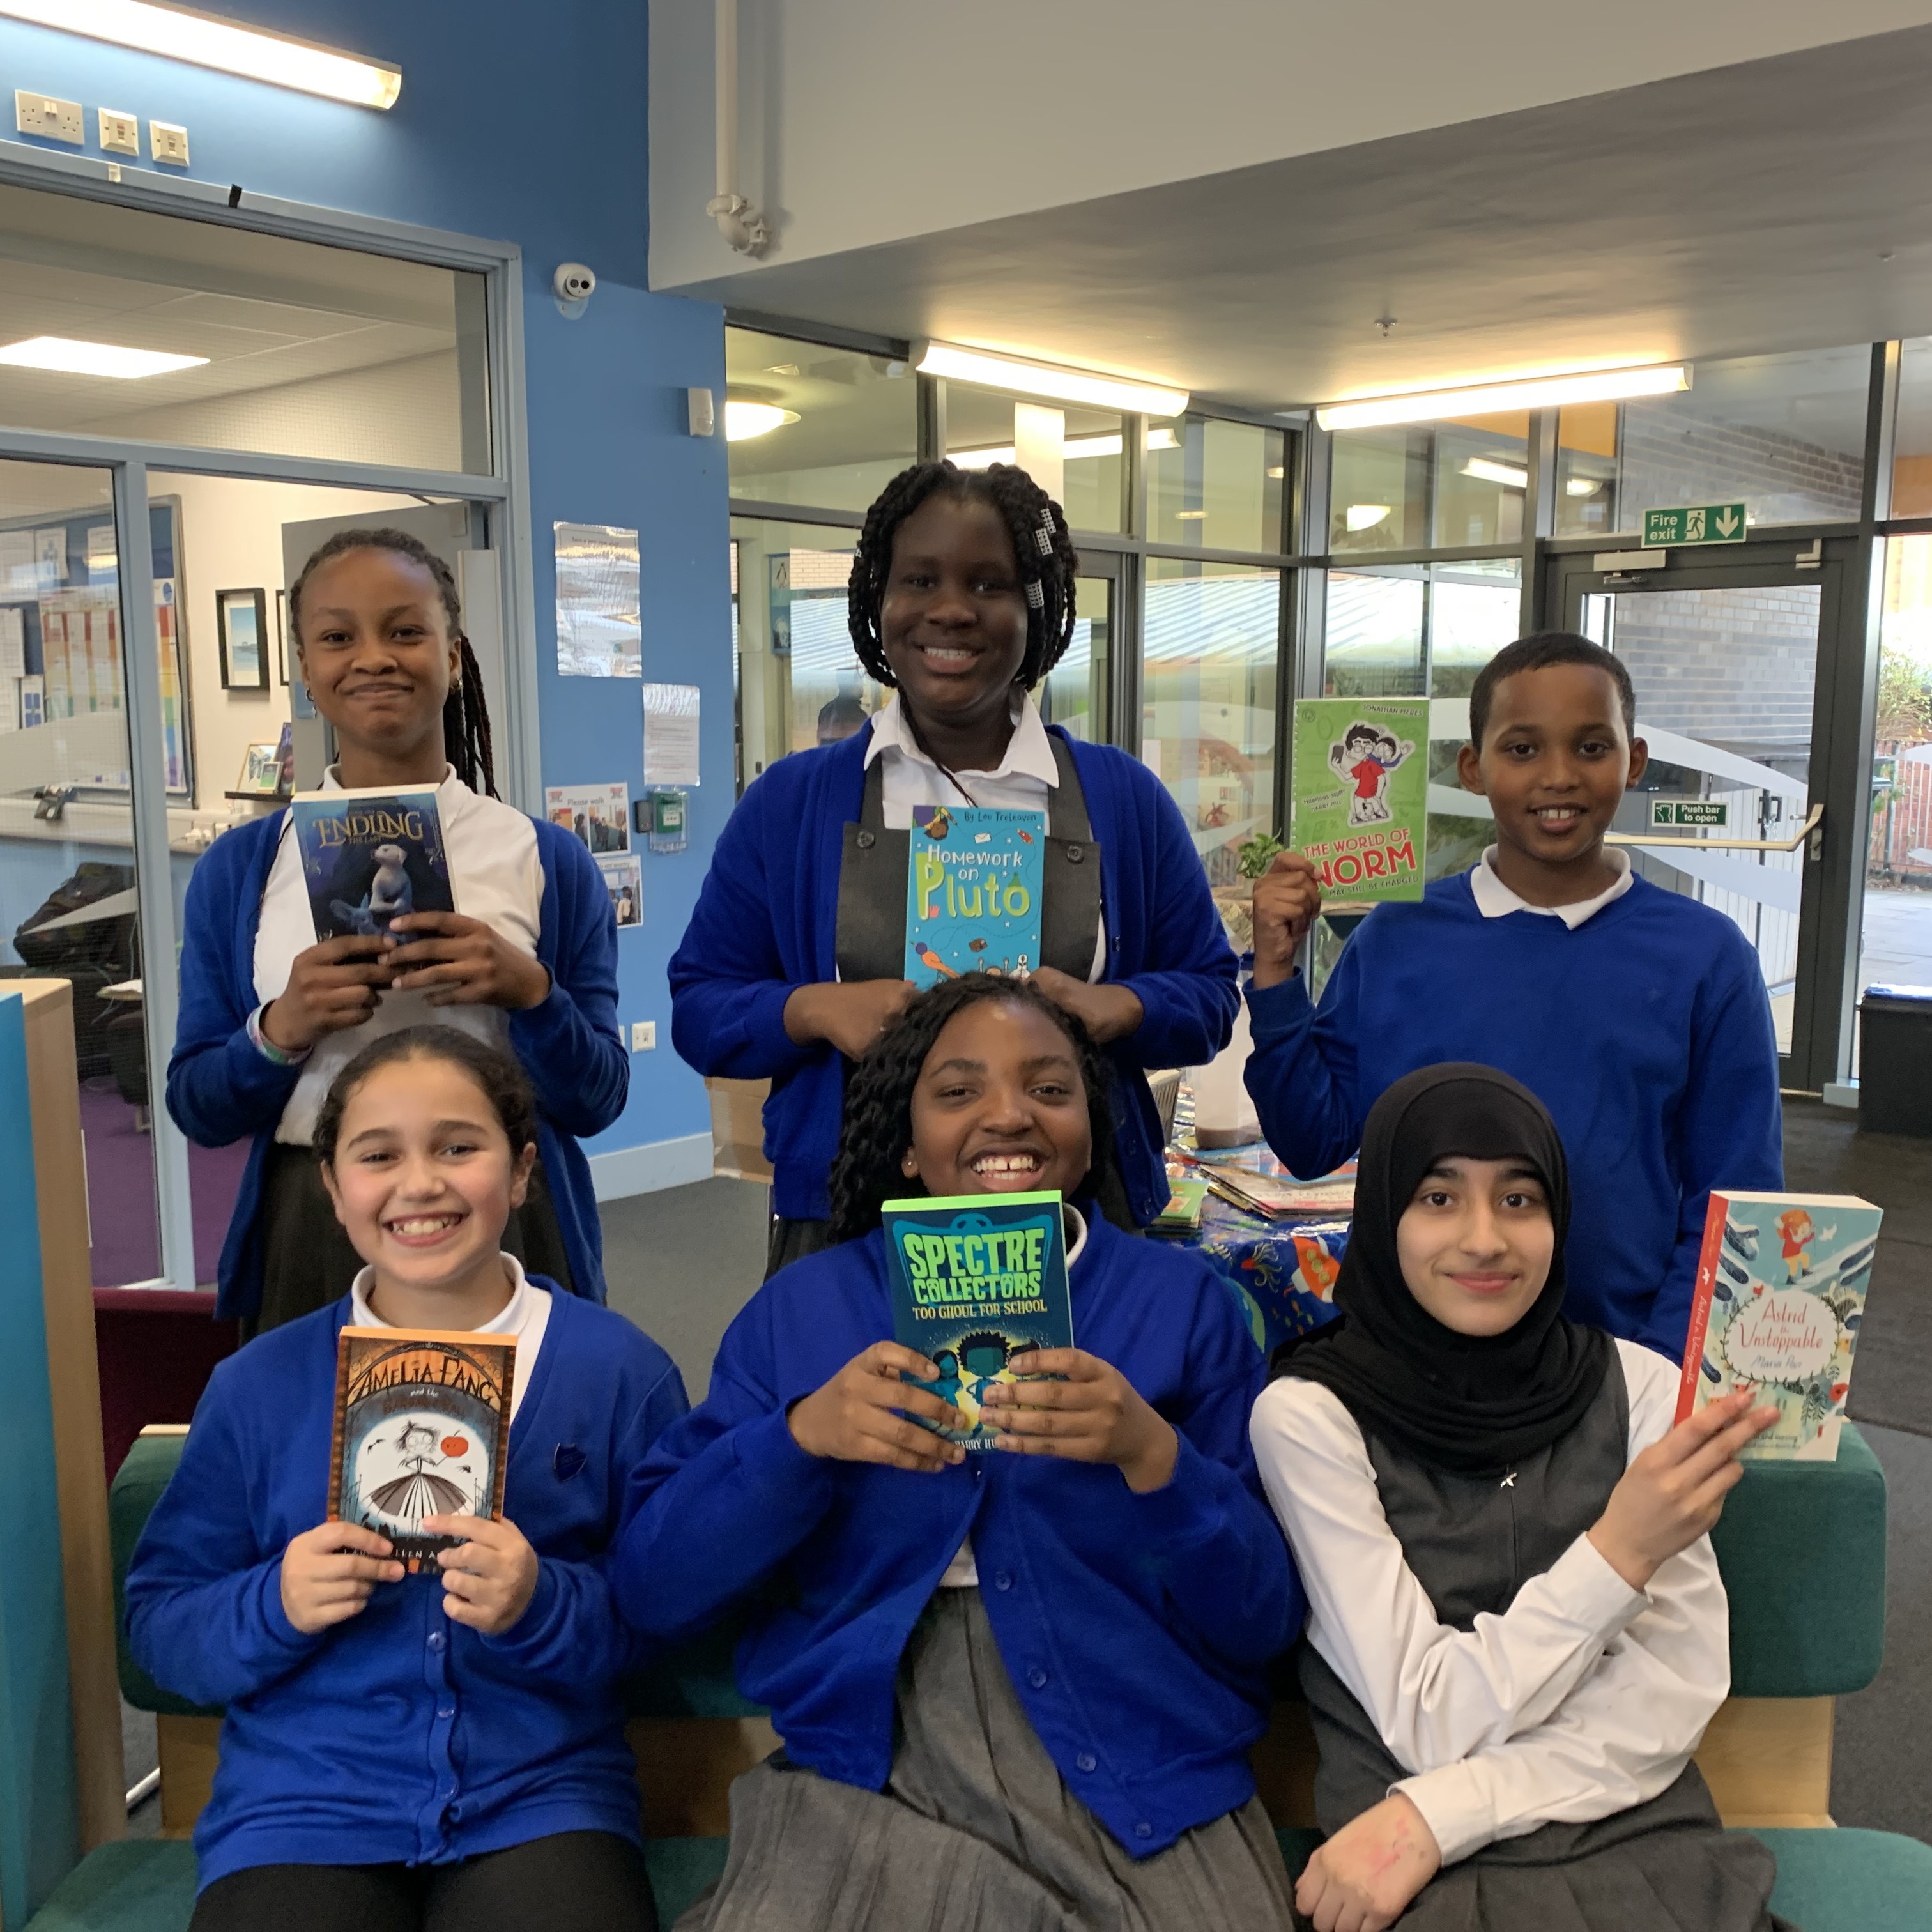 Students at George Dixon Primary School smiling and posing with their favourite books, which were donated by the Smile Education recruitment team